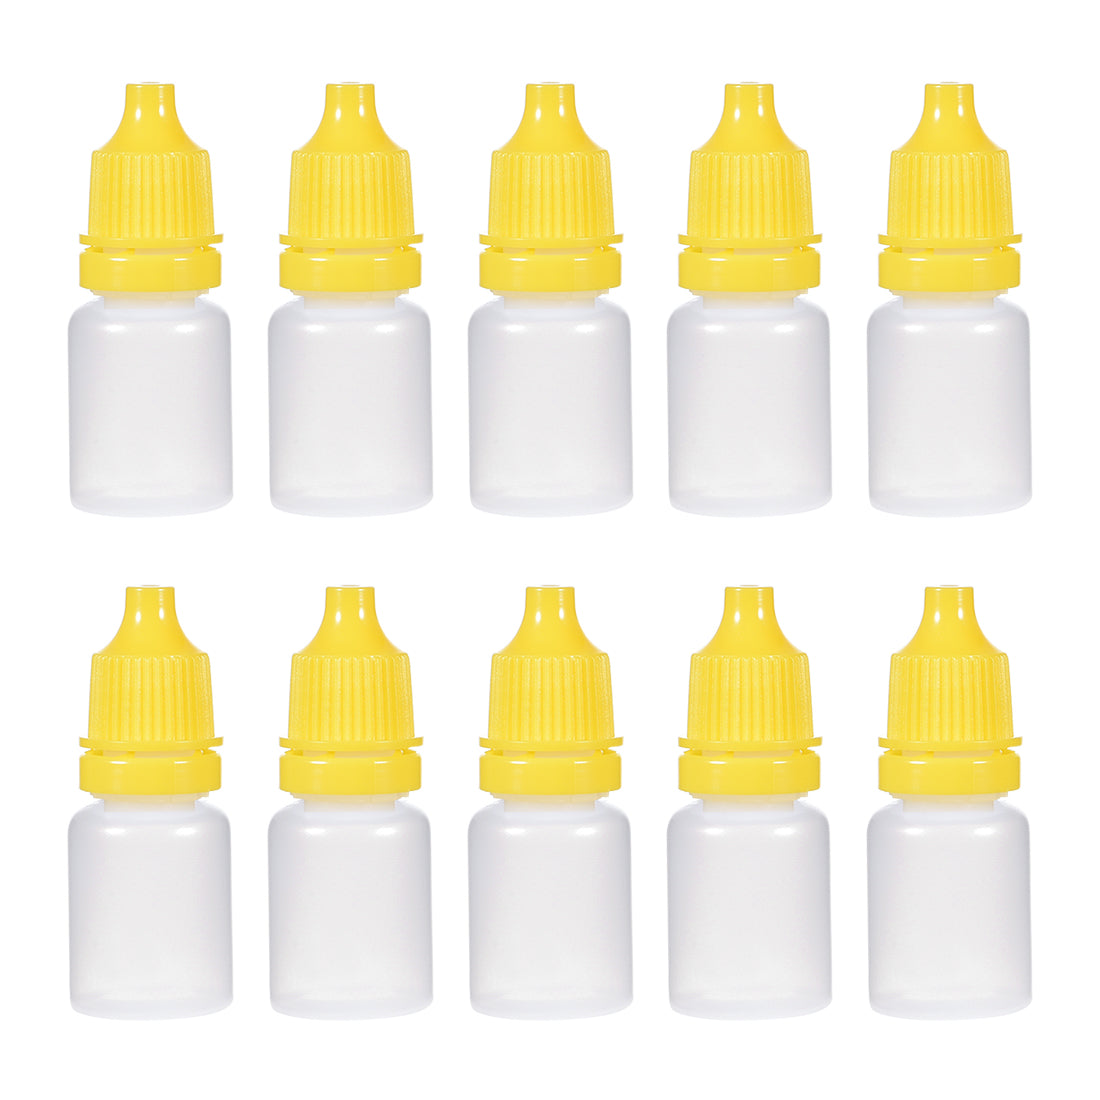 uxcell Uxcell 5ml/0.17 oz Empty Squeezable Dropper Bottle Yellow 10pcs